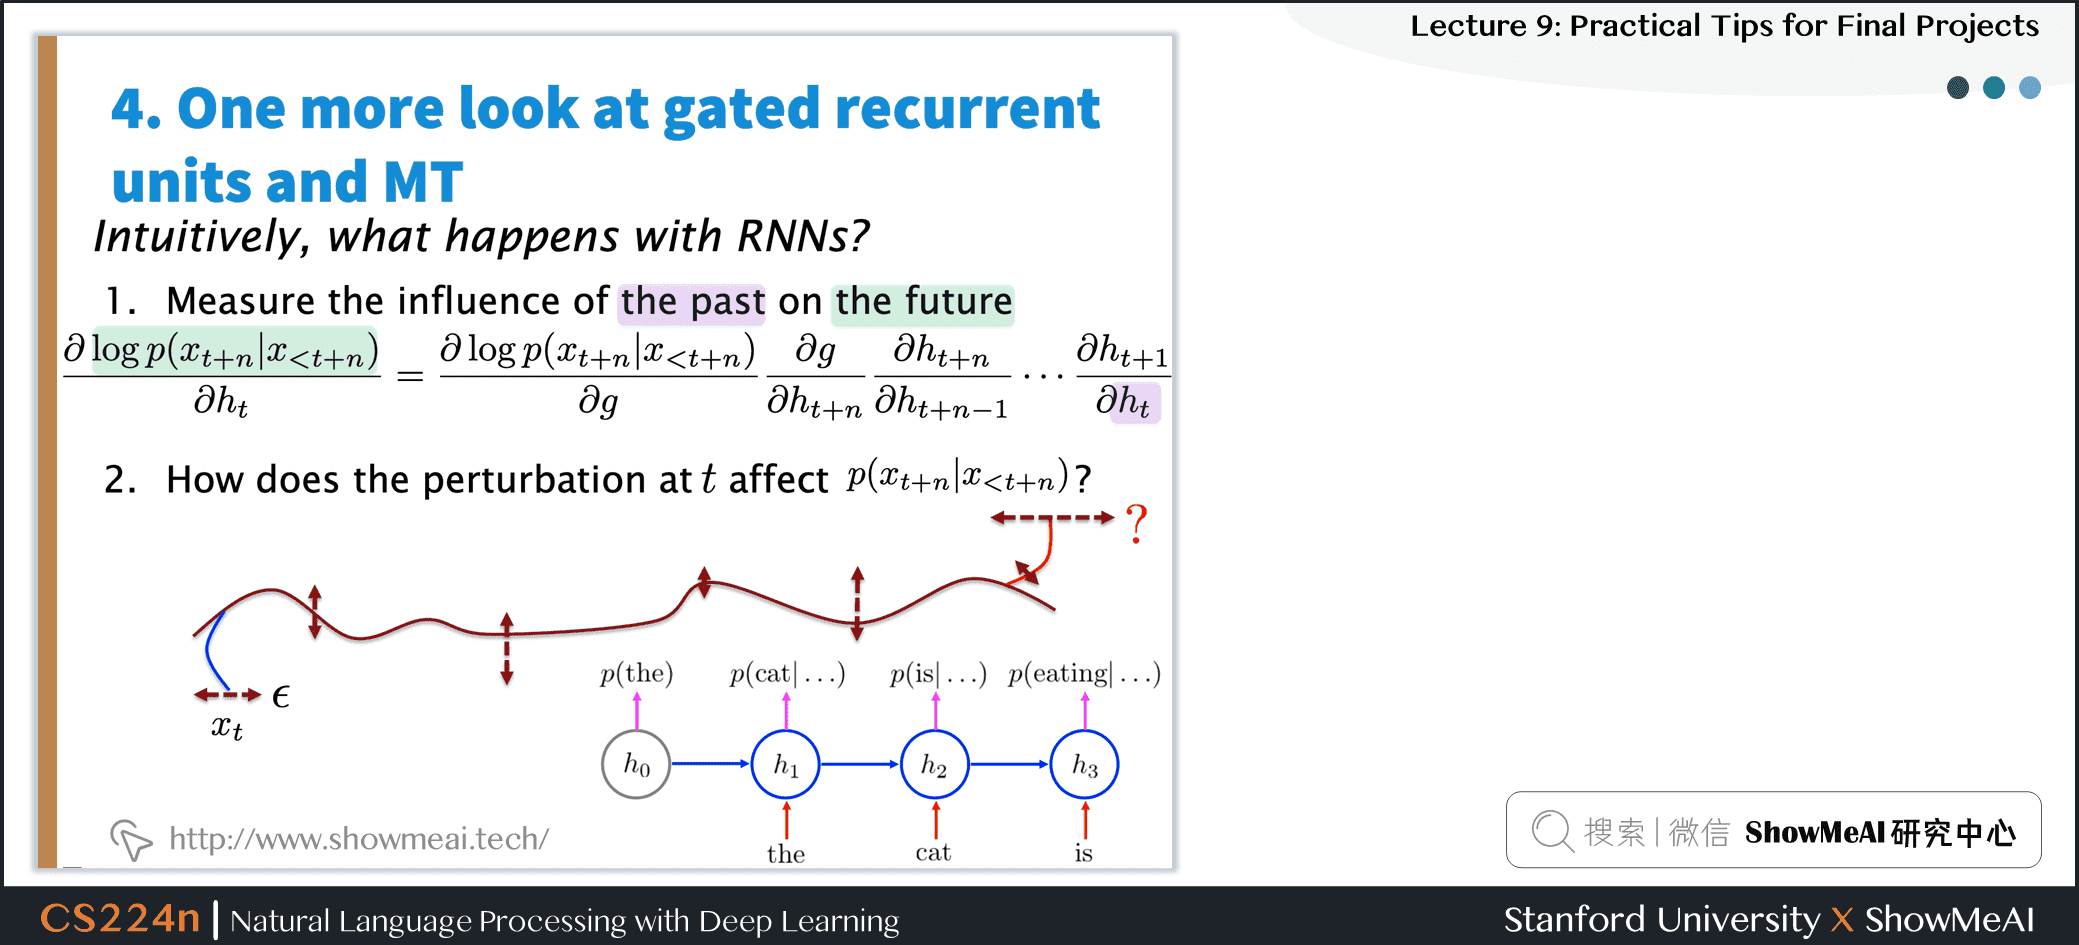 One more look at gated recurrent units and MT